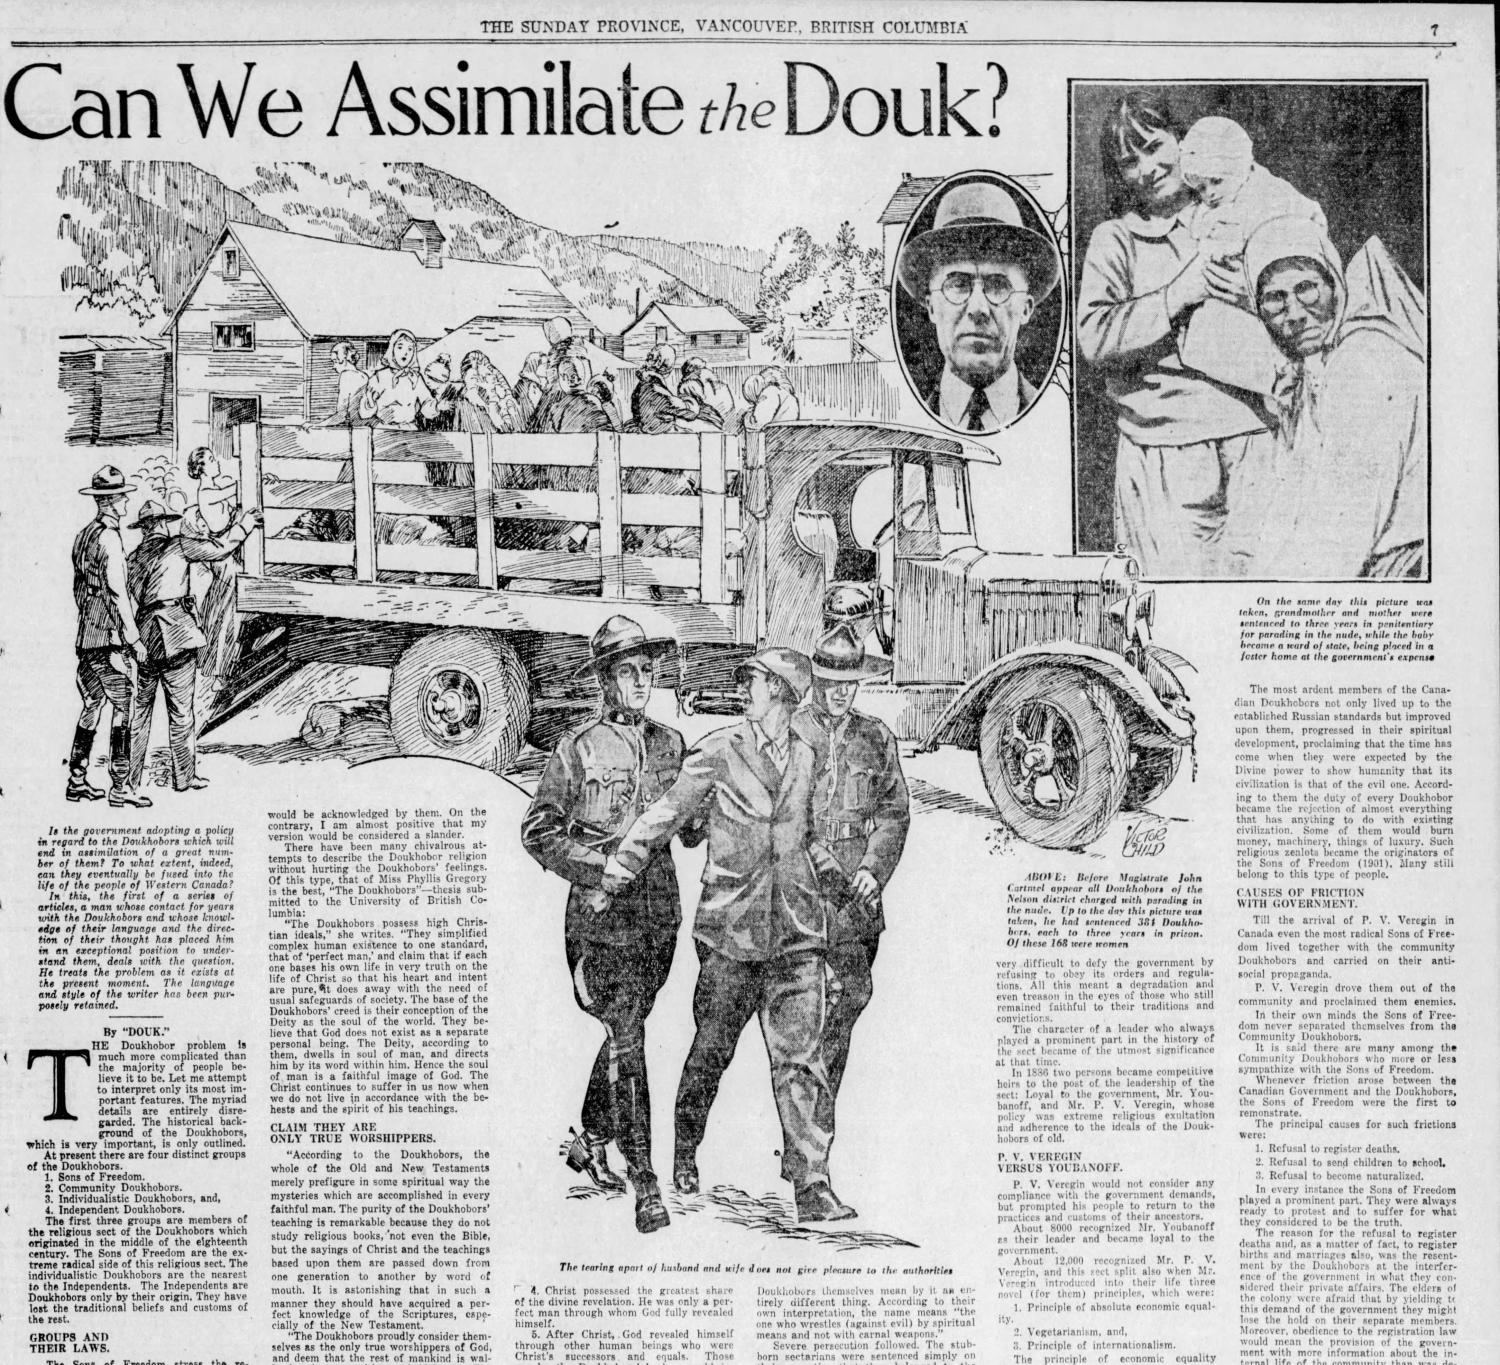 News article about Doukhobors being arrested